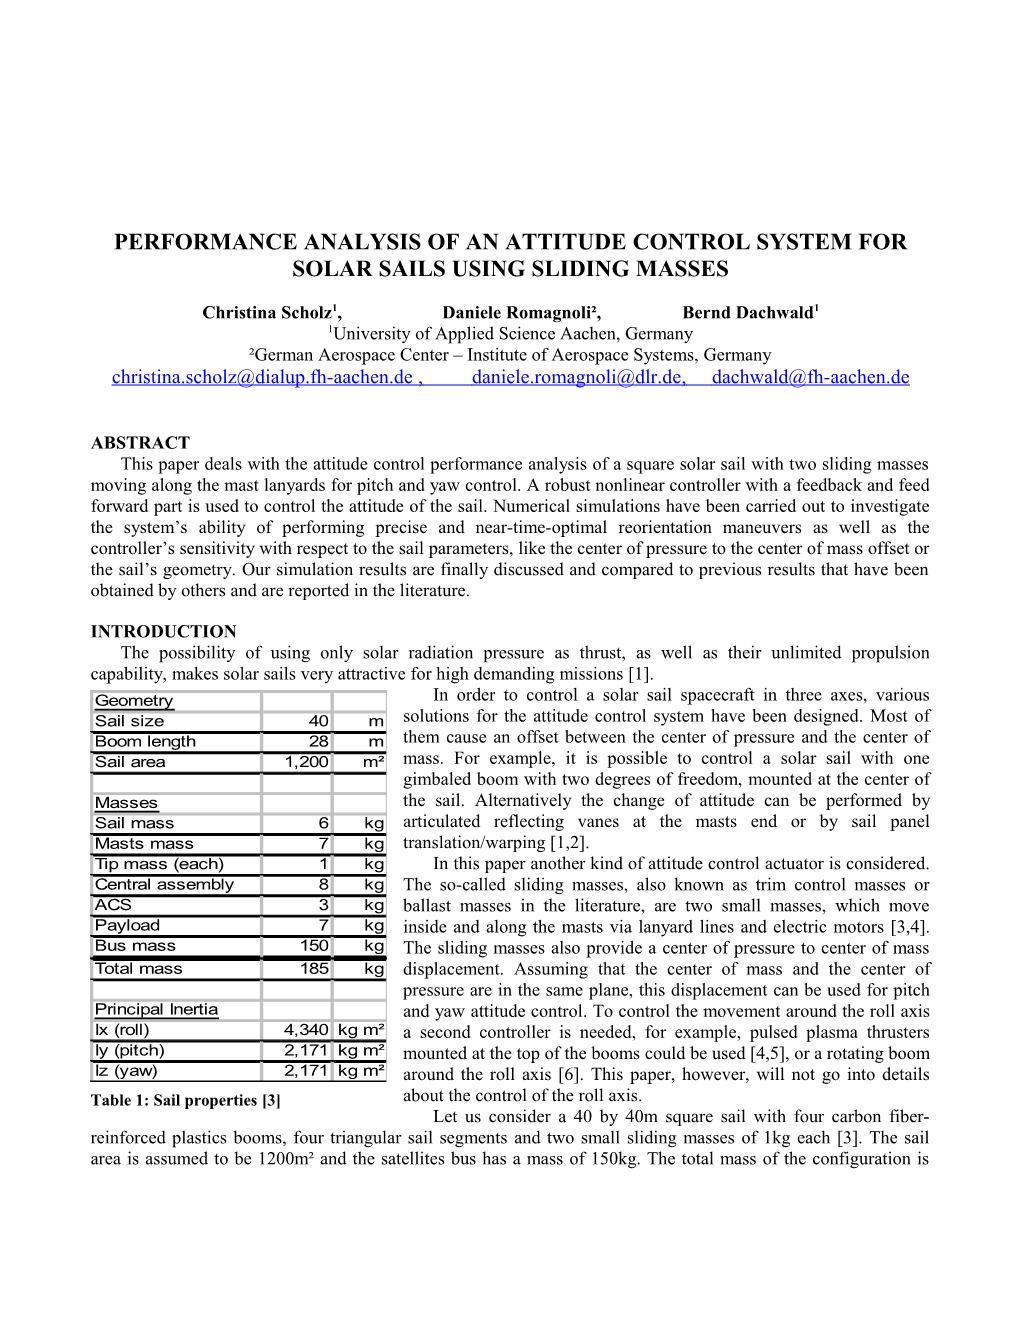 Performance Analysis of an Attitude Control System for Solar Sails Using Sliding Masses